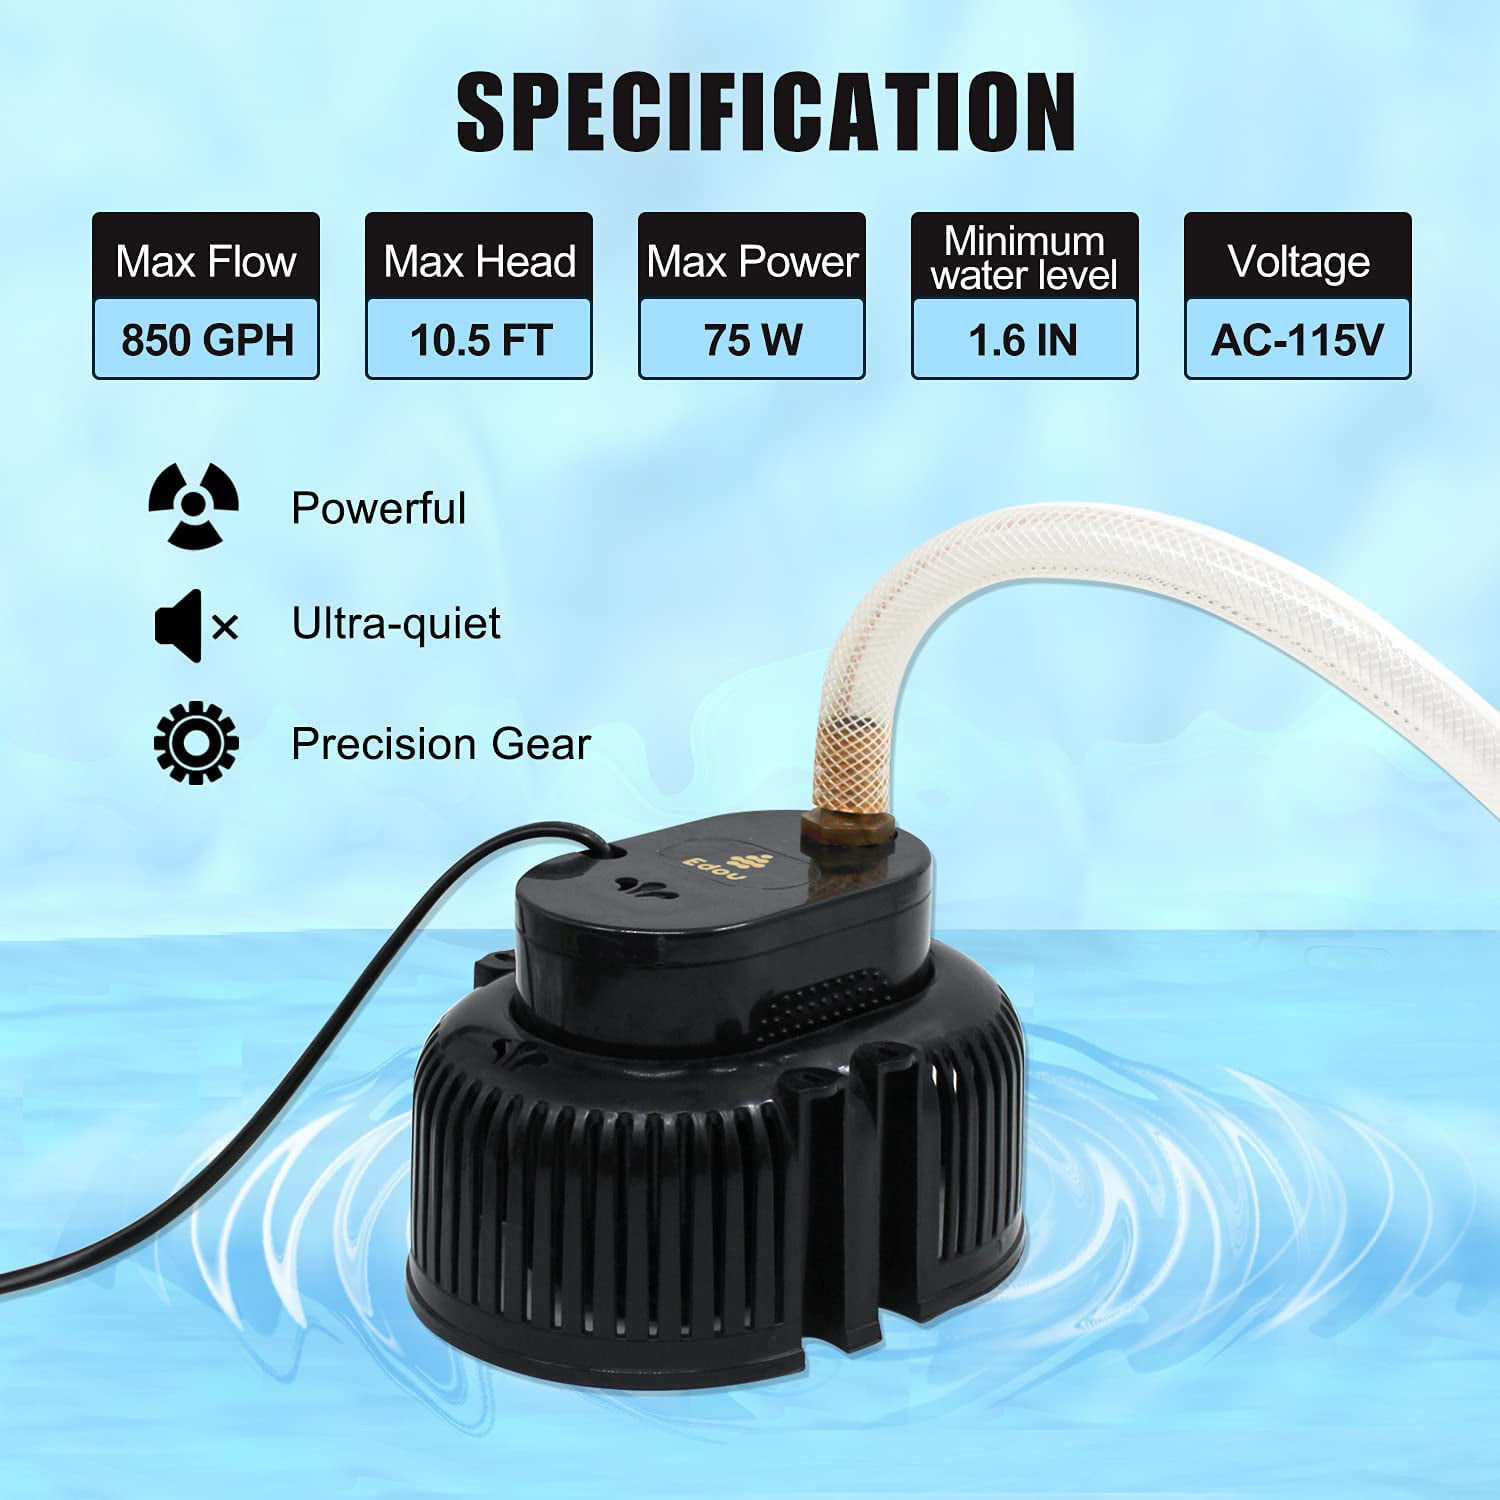 Ideal for Draining Water Above Ground 850 GPH Max Flow 75W Max Power Black In-Ground Pools Includes 16 Feet Kink-Proof Drainage Hose and 3 Adapters EDOU Submersible Swimming Pool Cover Pump